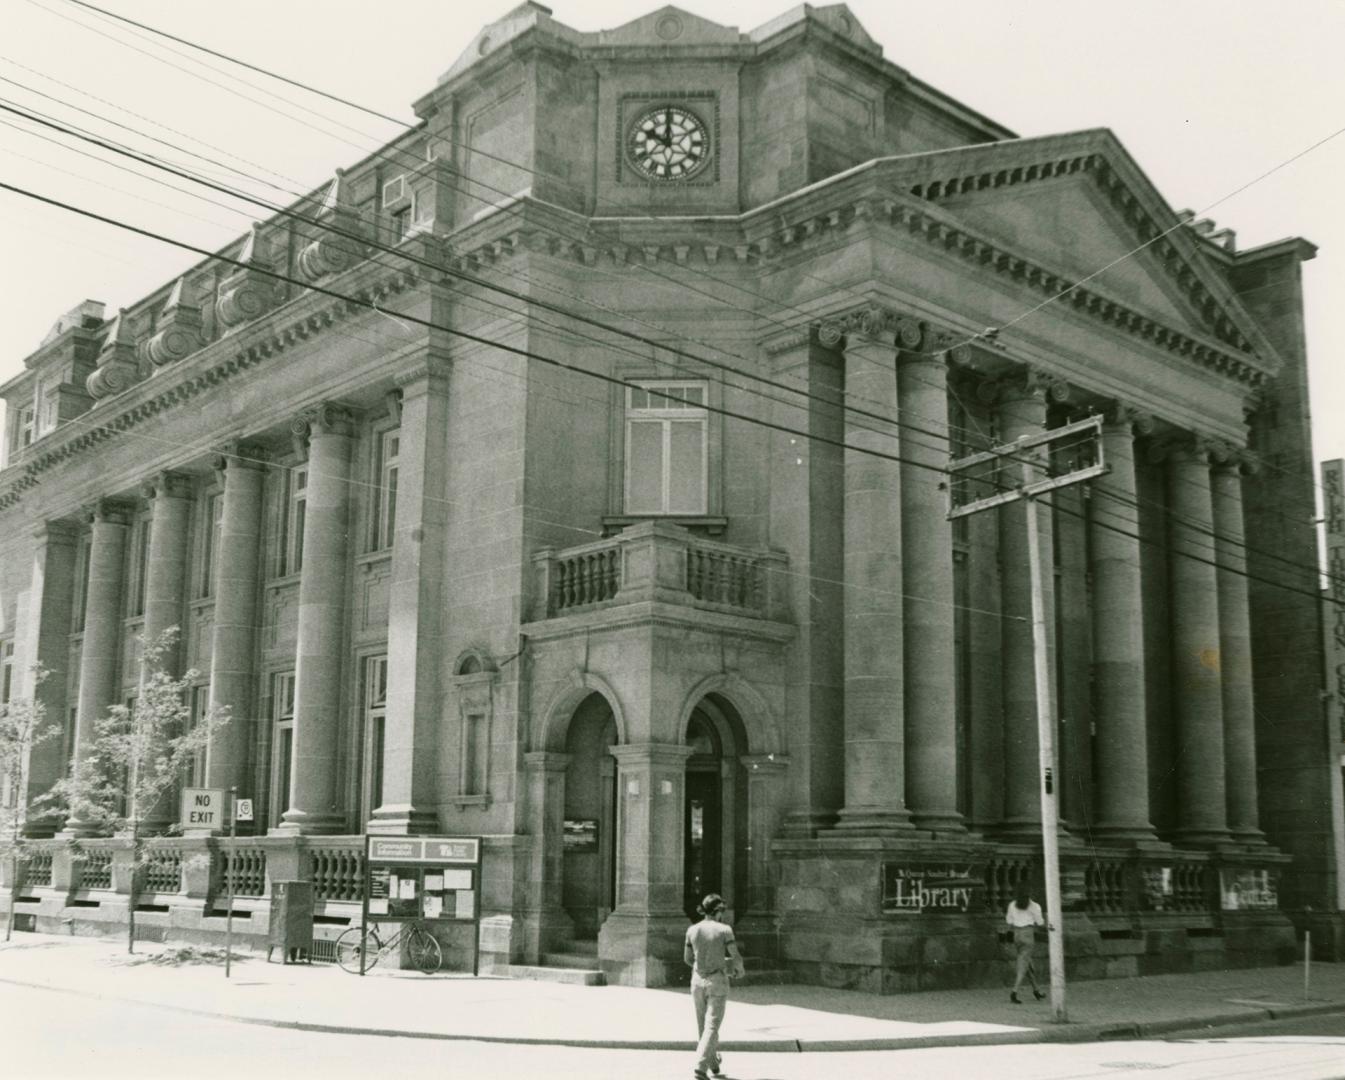 Postal Station G, now Queen Saulter Branch, Toronto Public Library